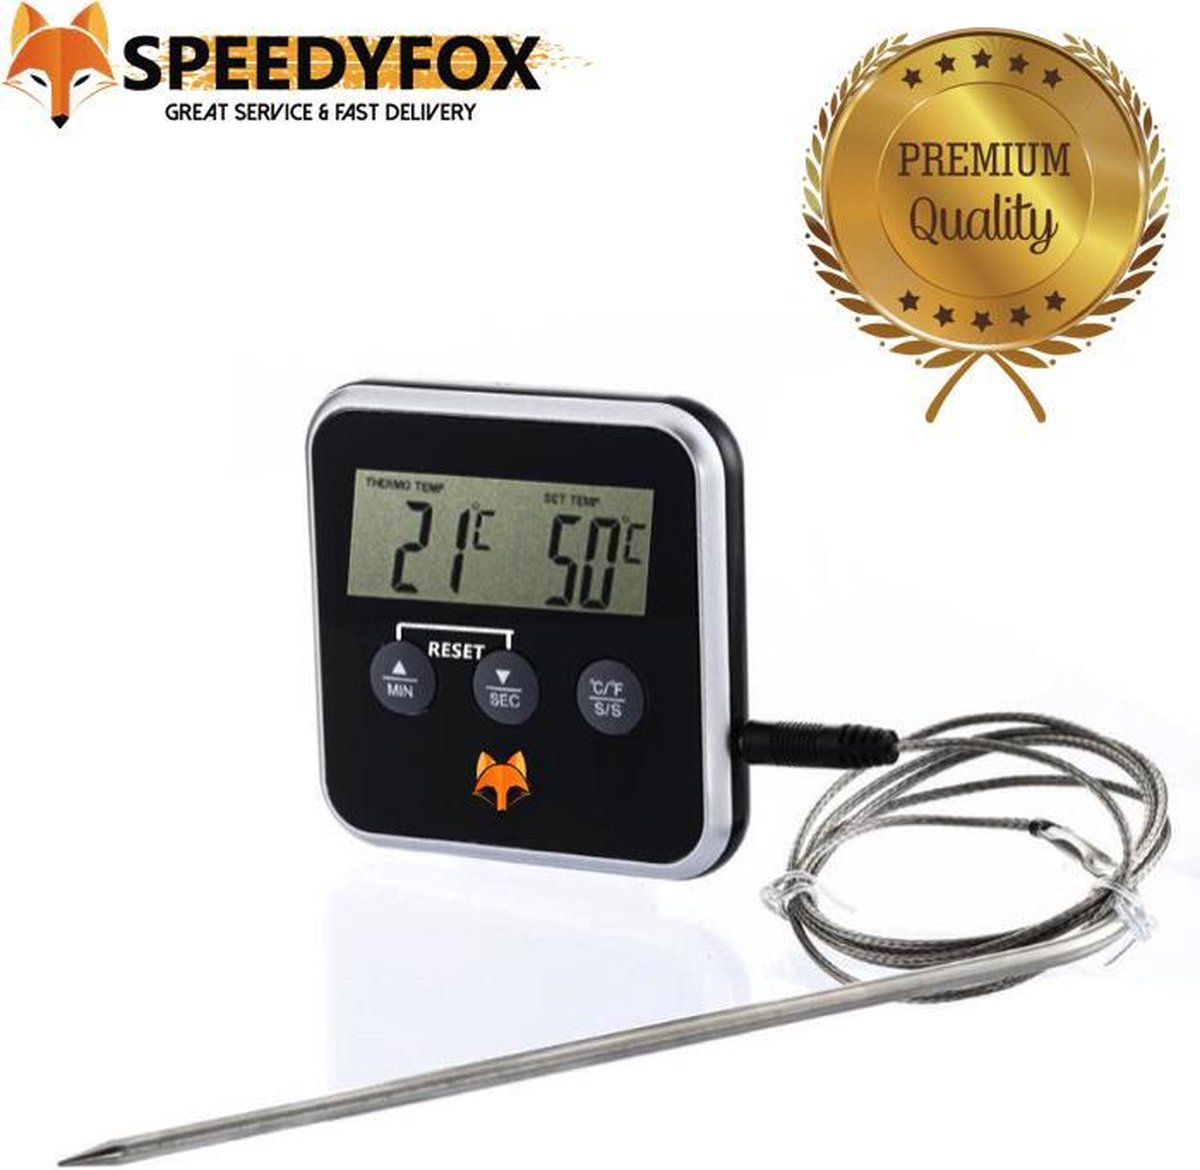 Vleesthermometer - bbq thermometer - Digitale kern thermometer - Vlees -  Oven - BBQ -... | bol.com